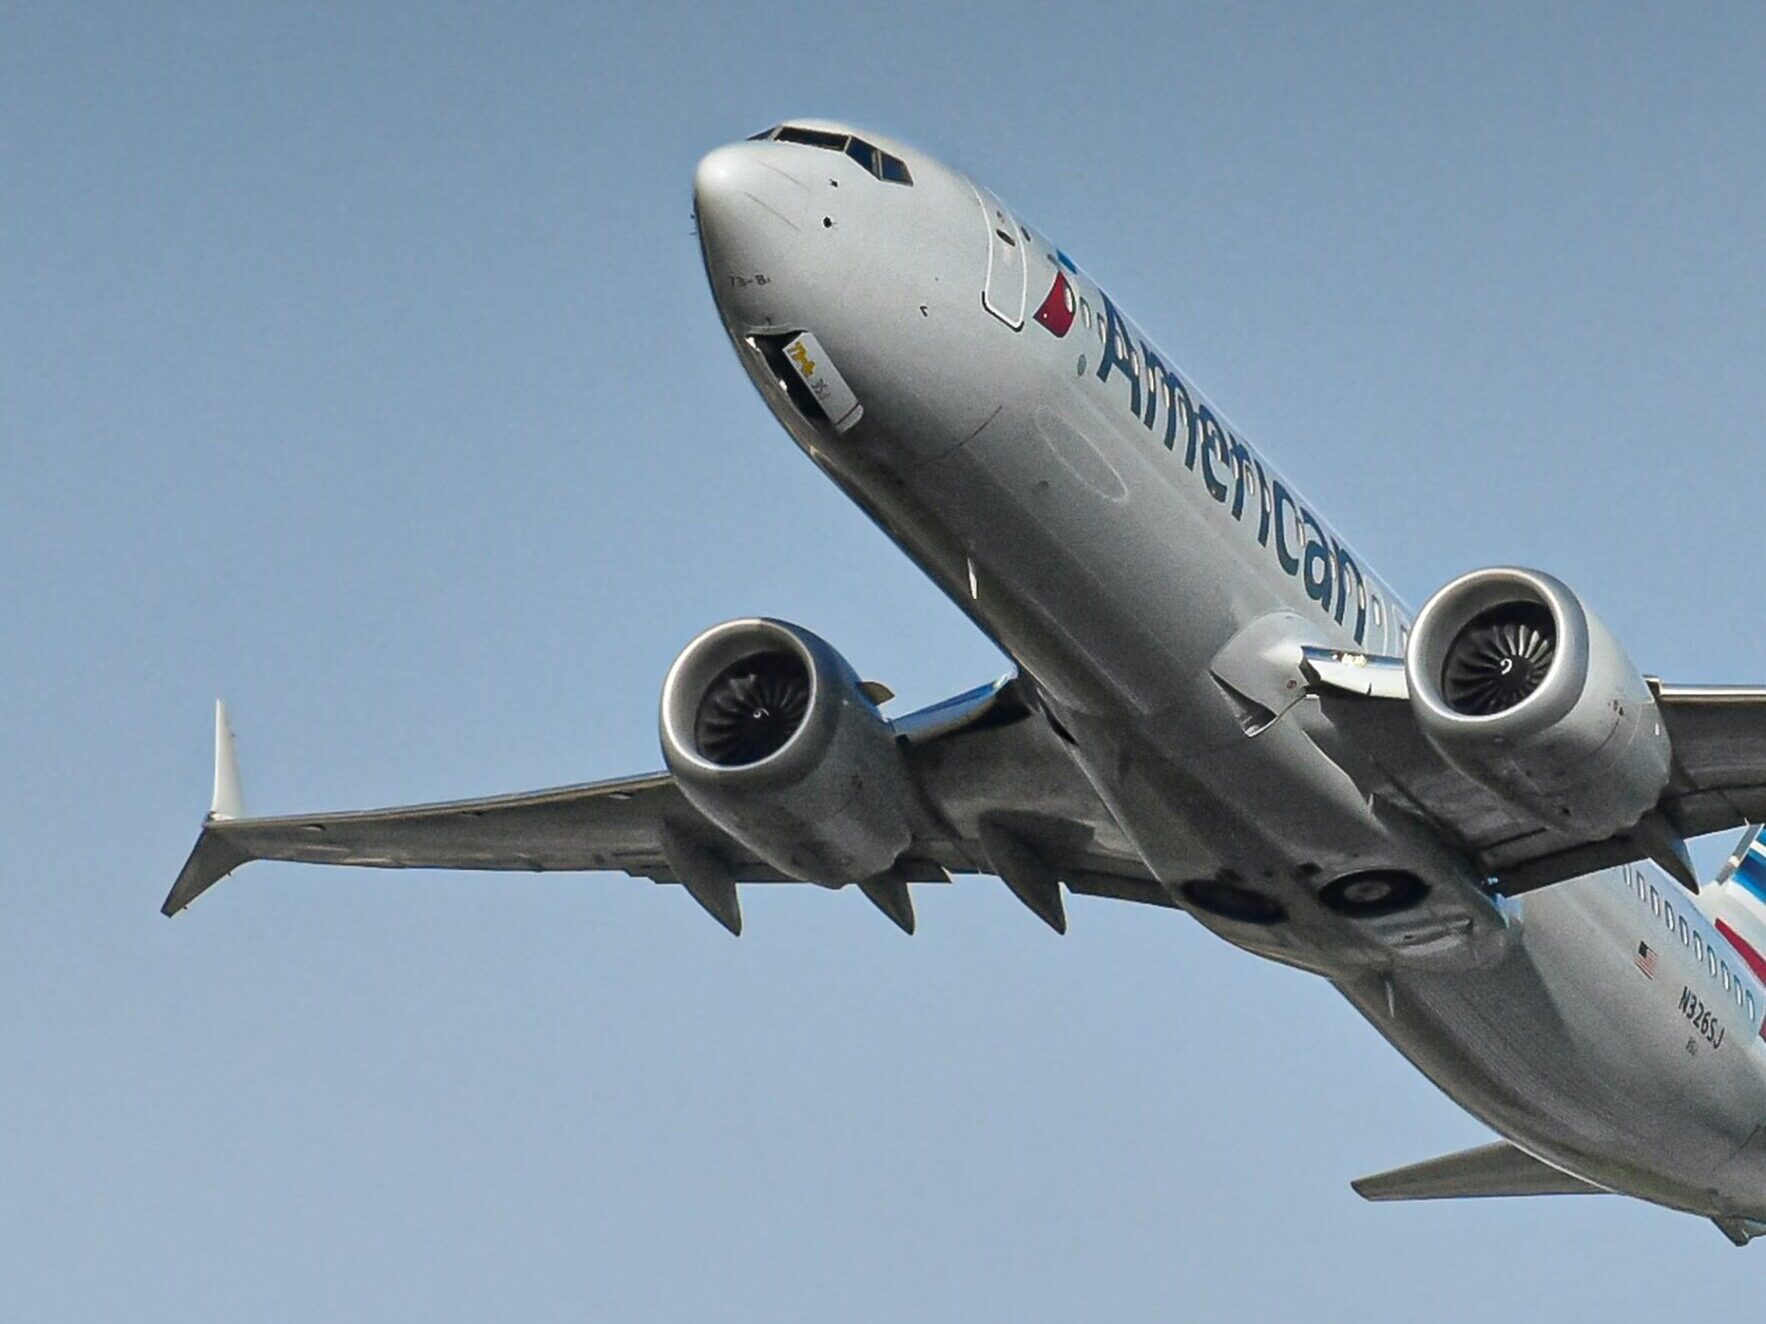 Revamping the Skies: American Airlines Plans to Replace 255 Aging Planes